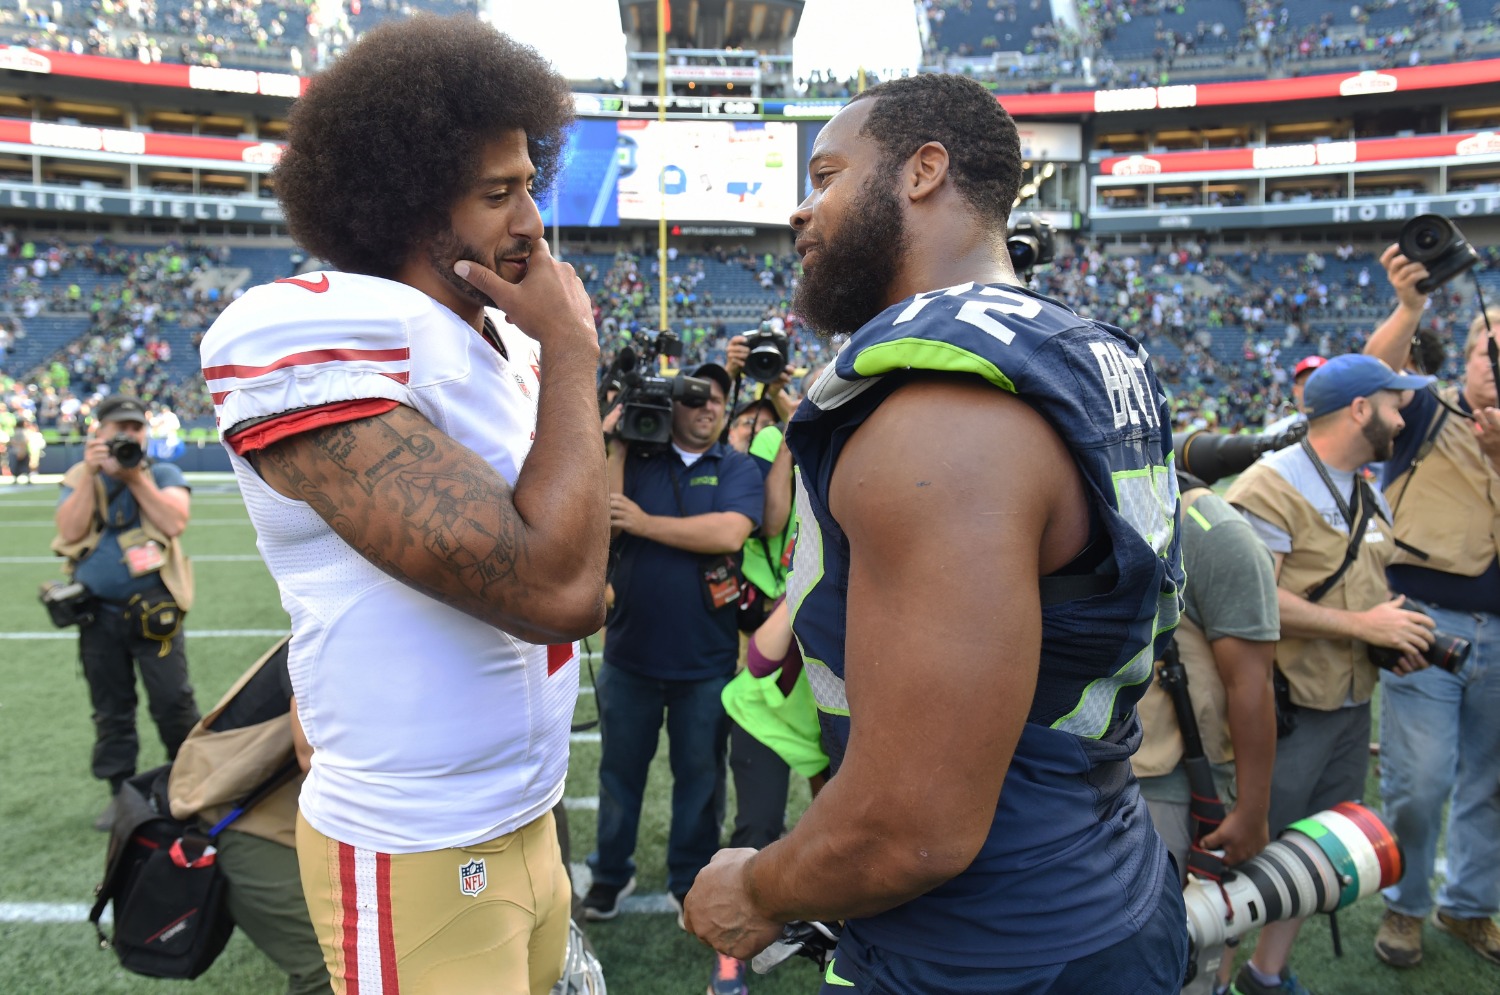 Michael Bennett can become the next Colin Kaepernick now that he's retired from the NFL.